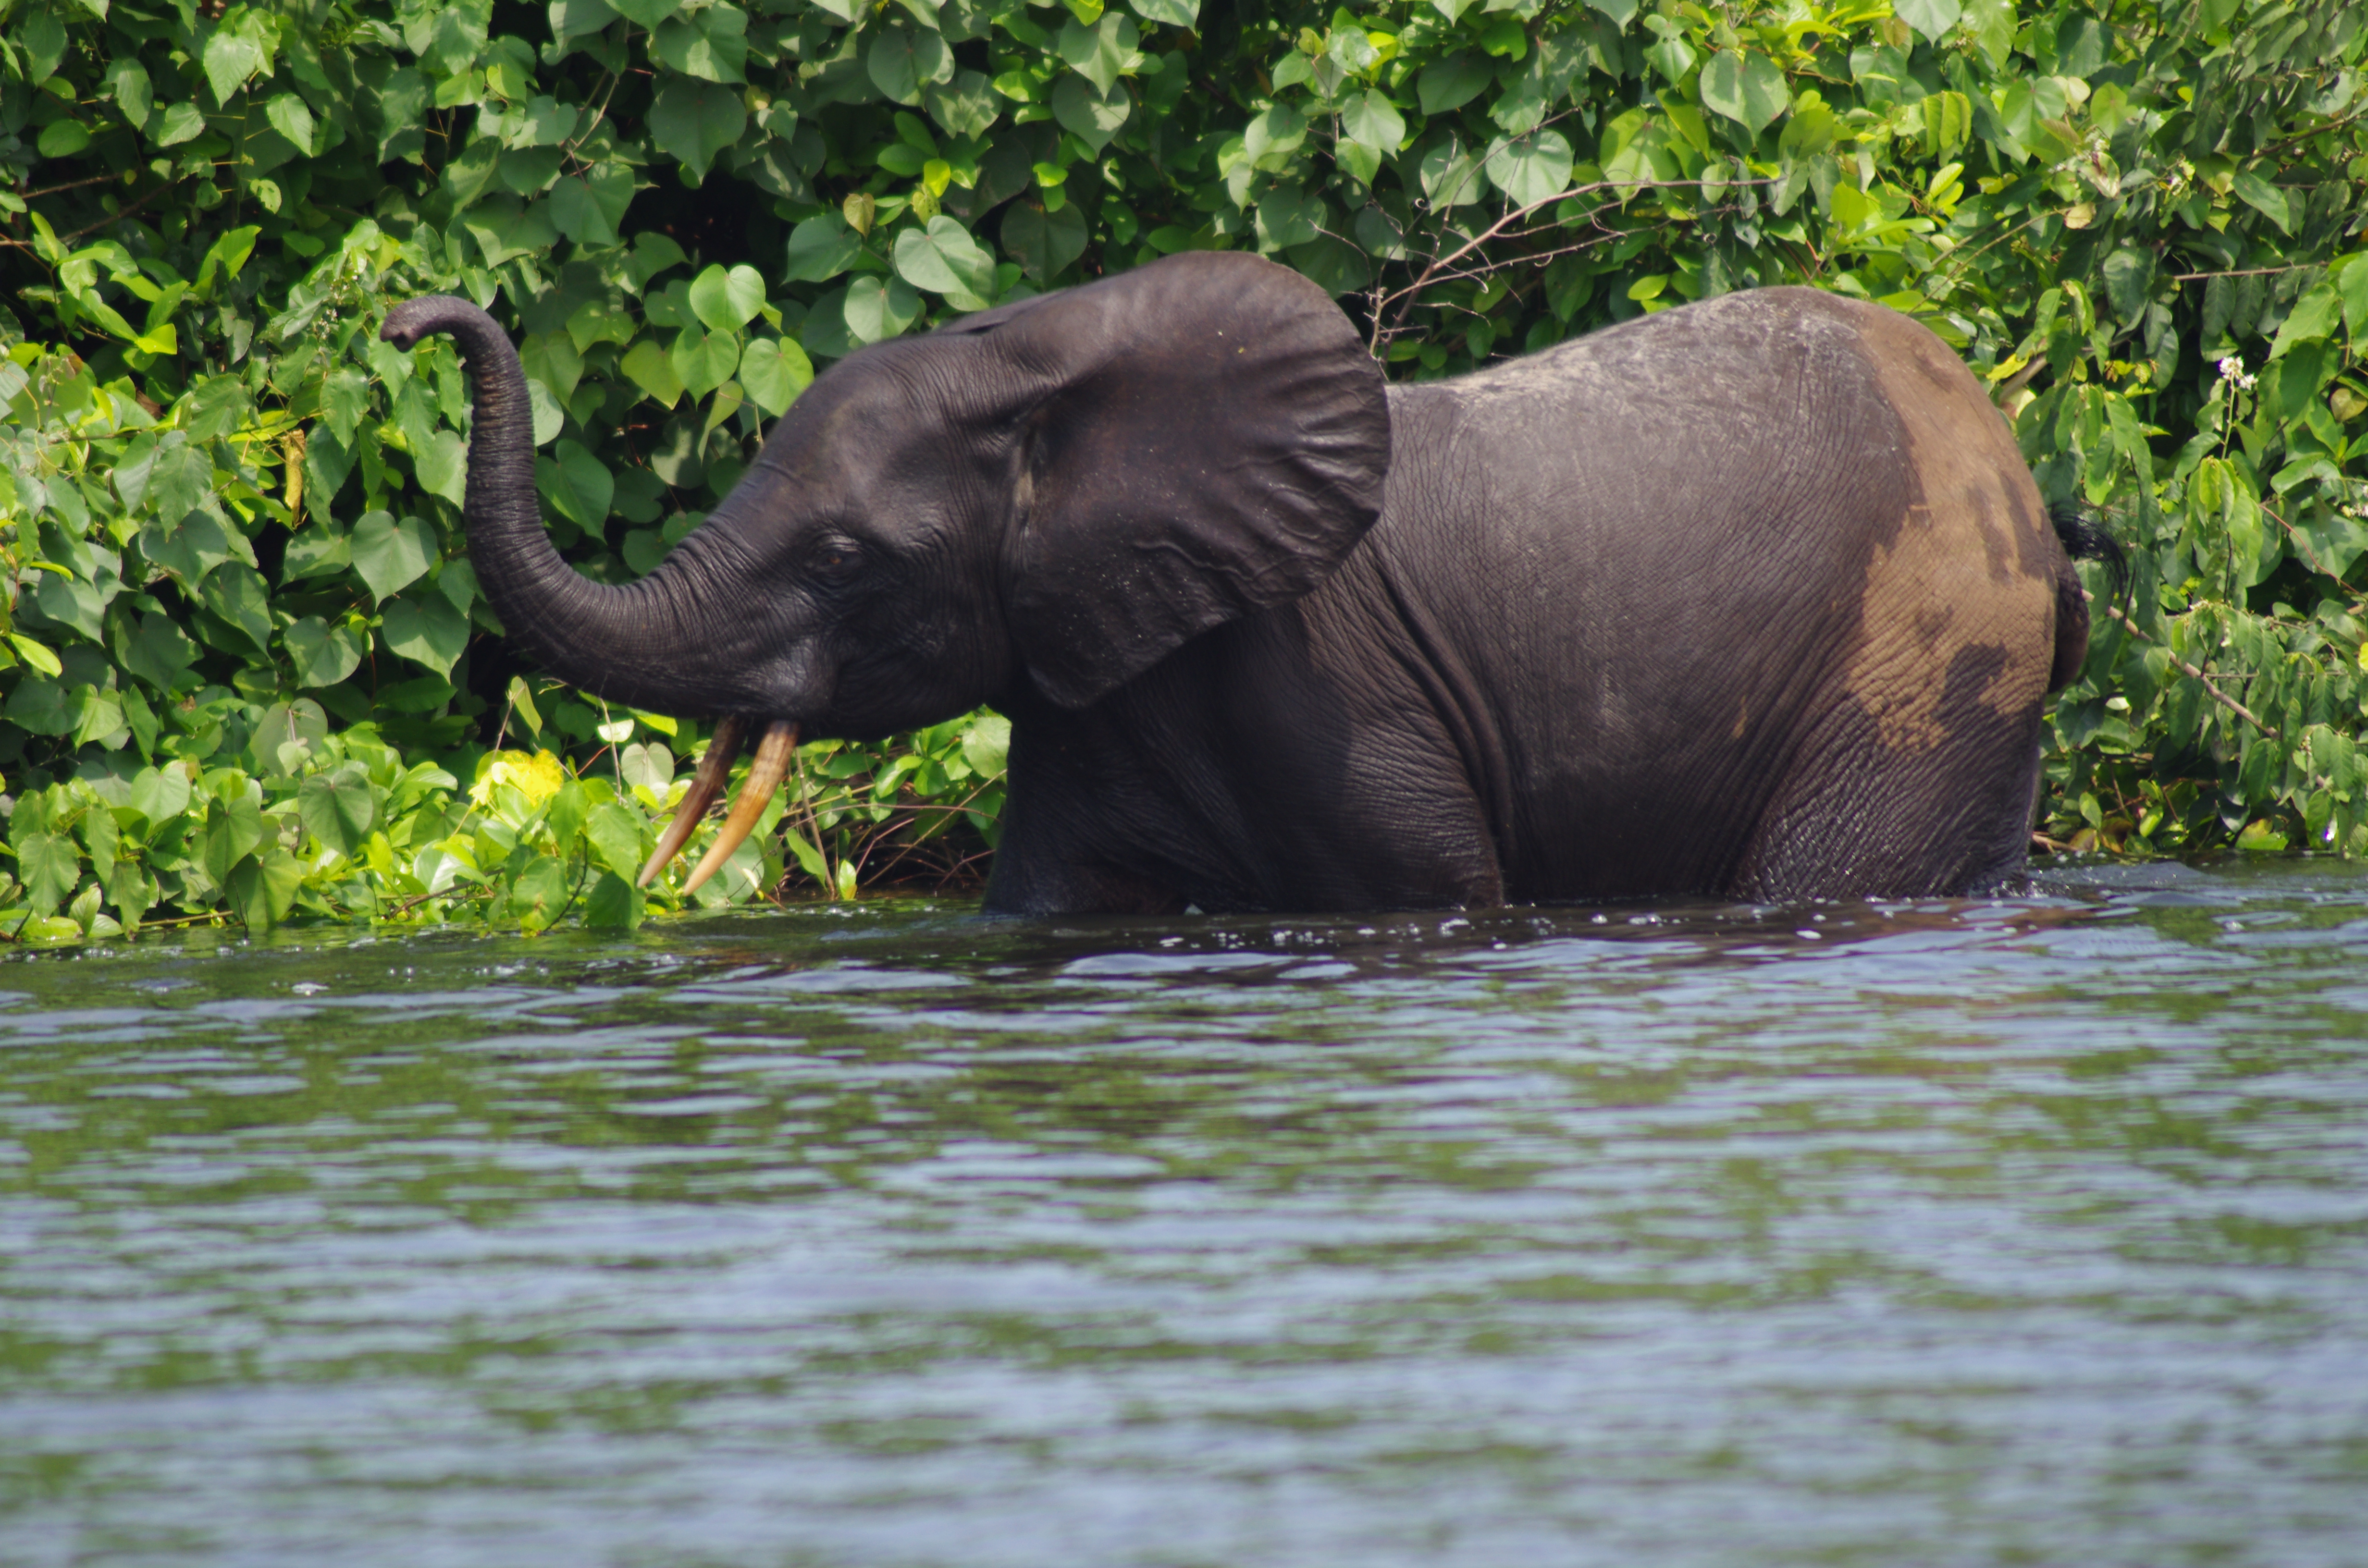 A forest elephant in the water at Loango National Park, Gabon (Lee White)